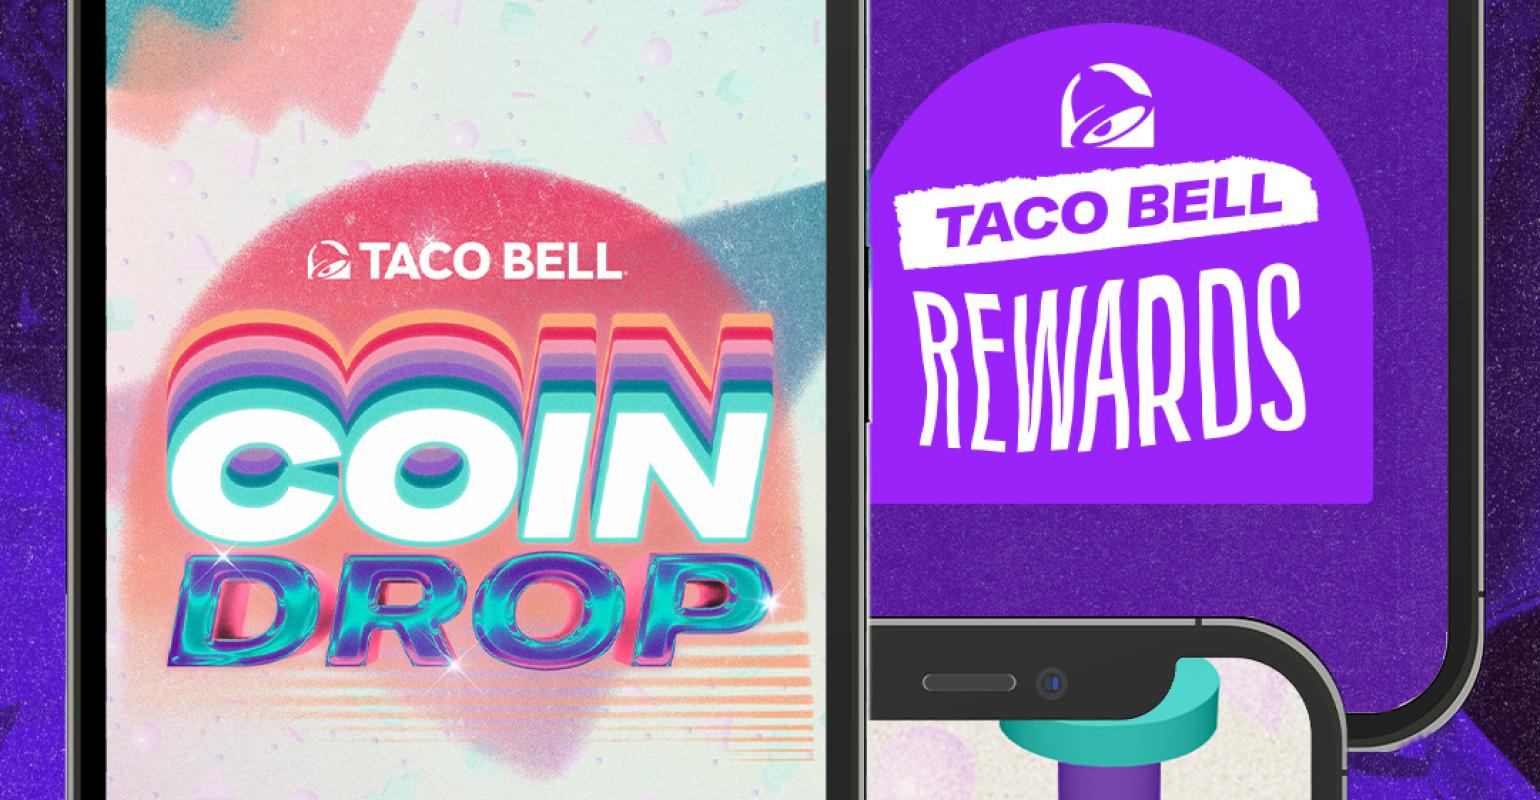 Taco Bell has digitized its iconic Coin Drop game